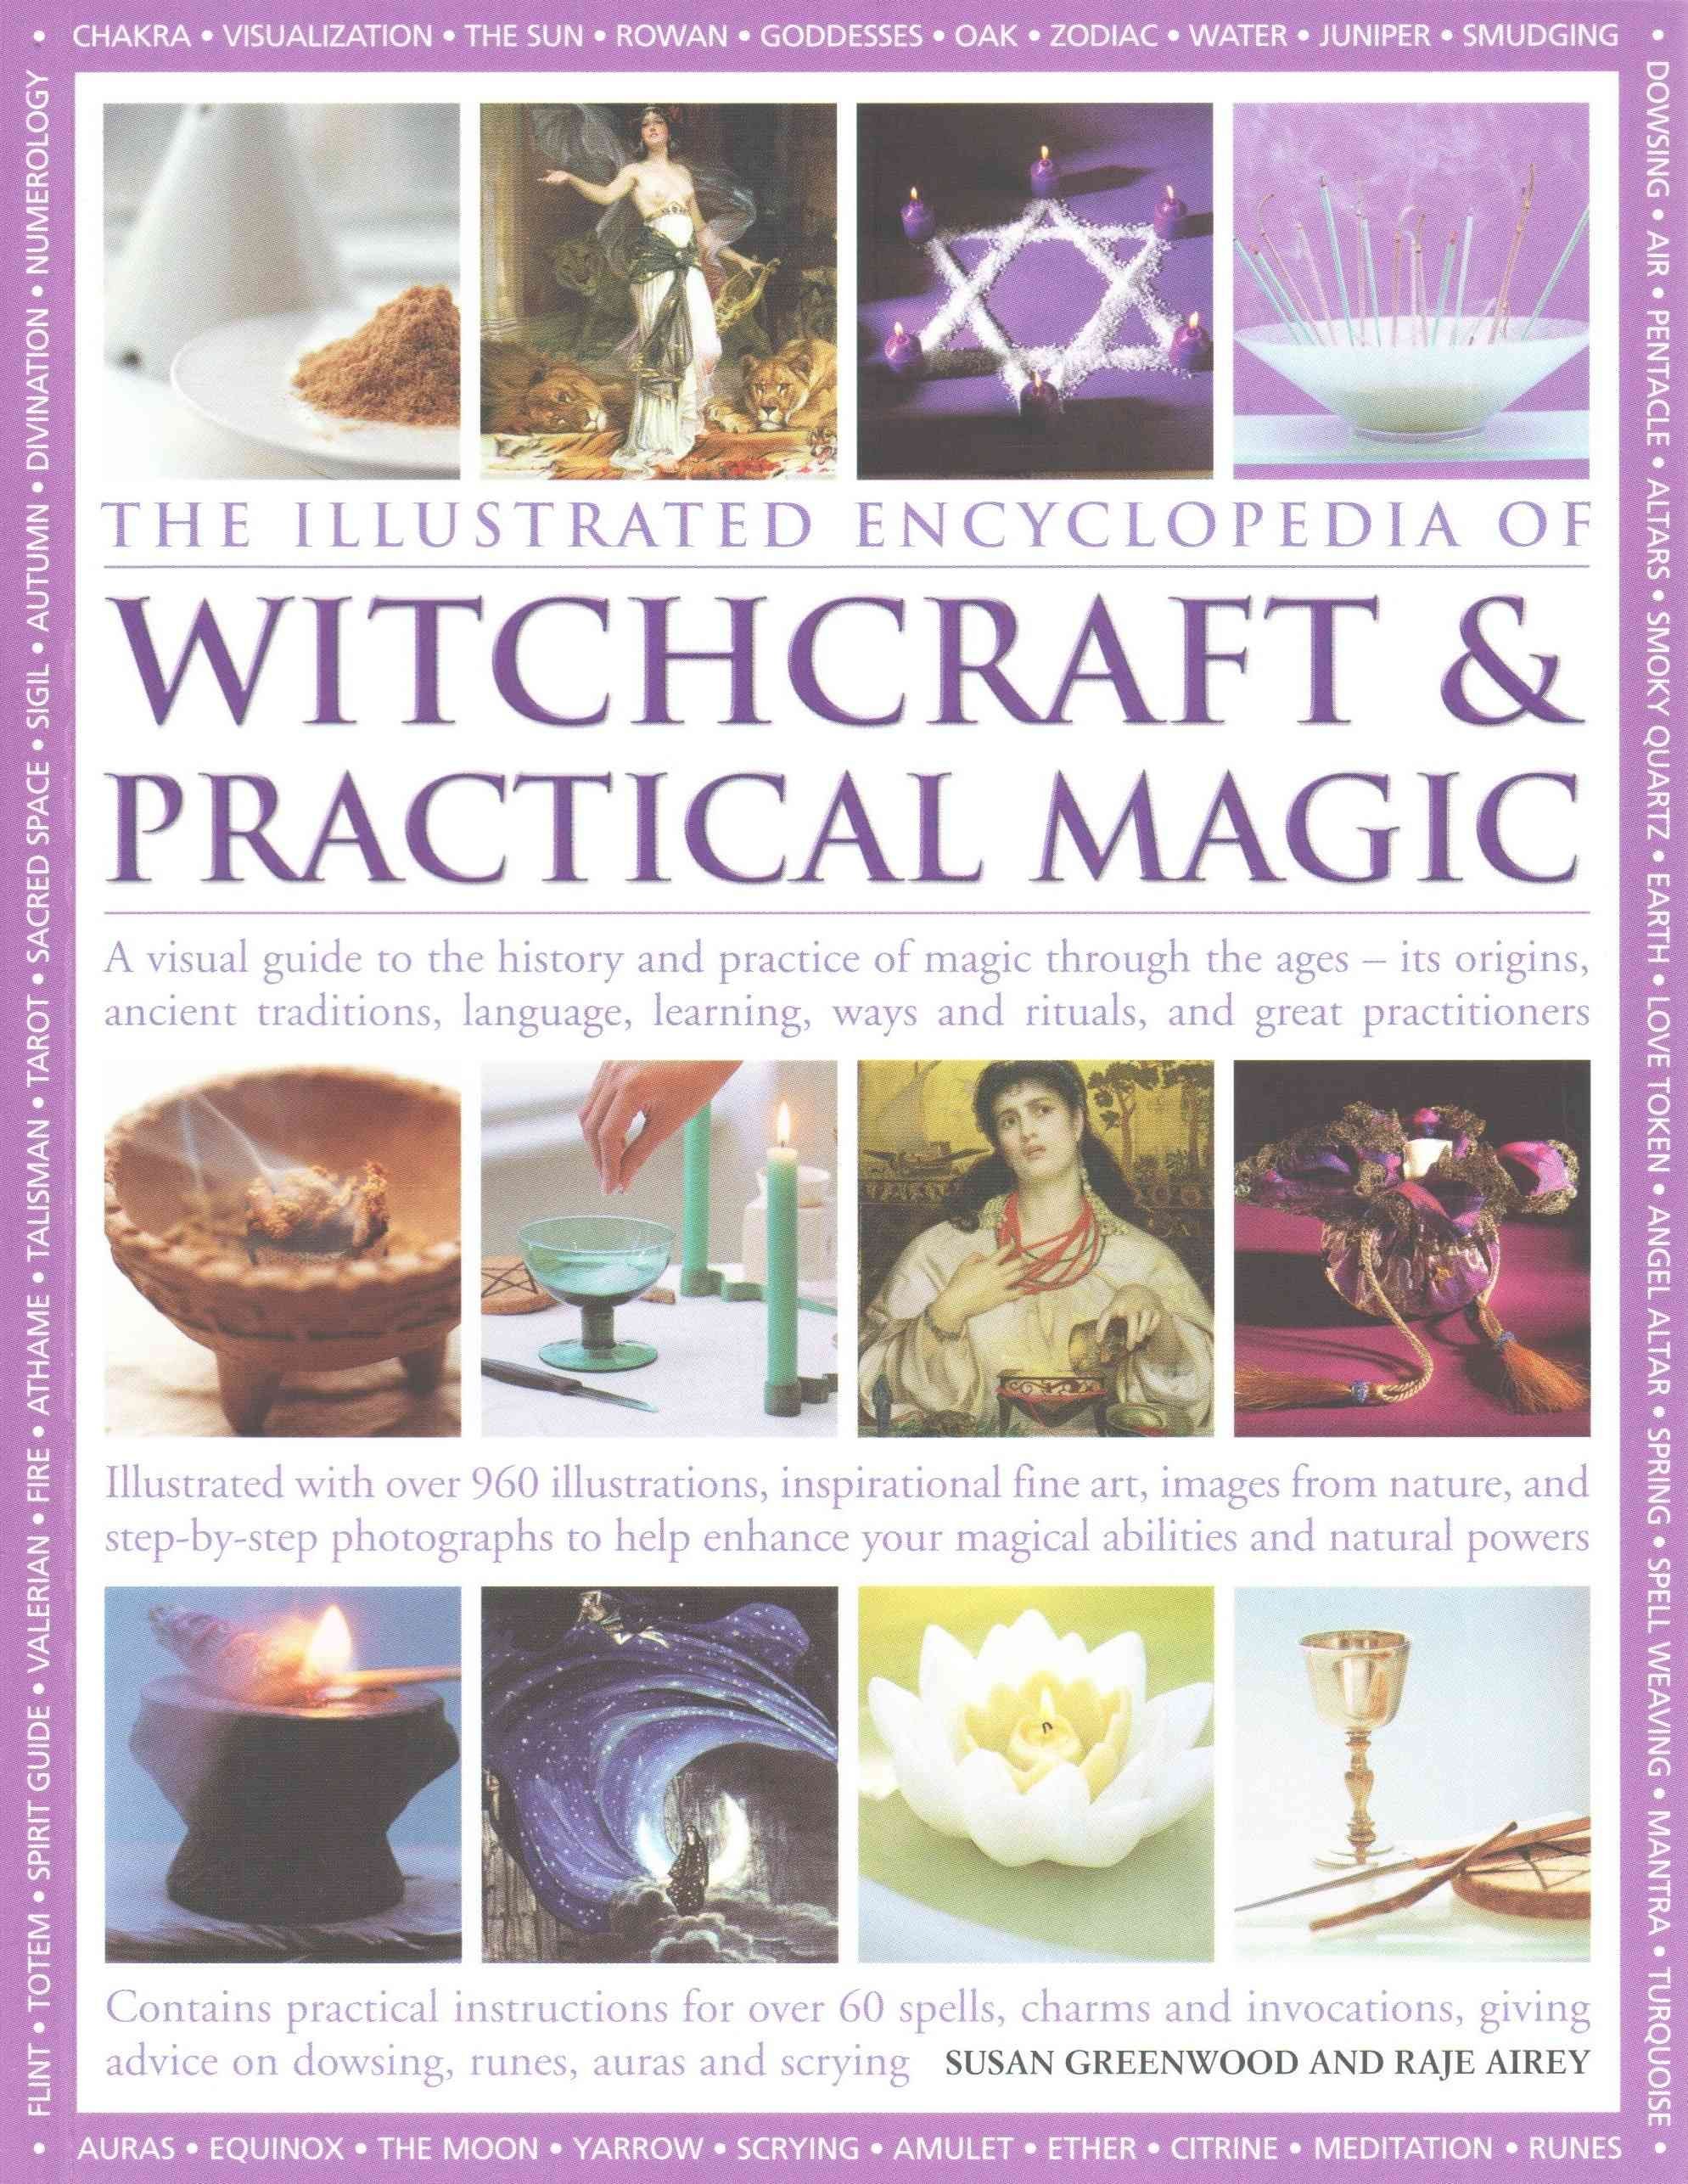 Illustrated Encyclopedia of Witchcraft & Practical Magic